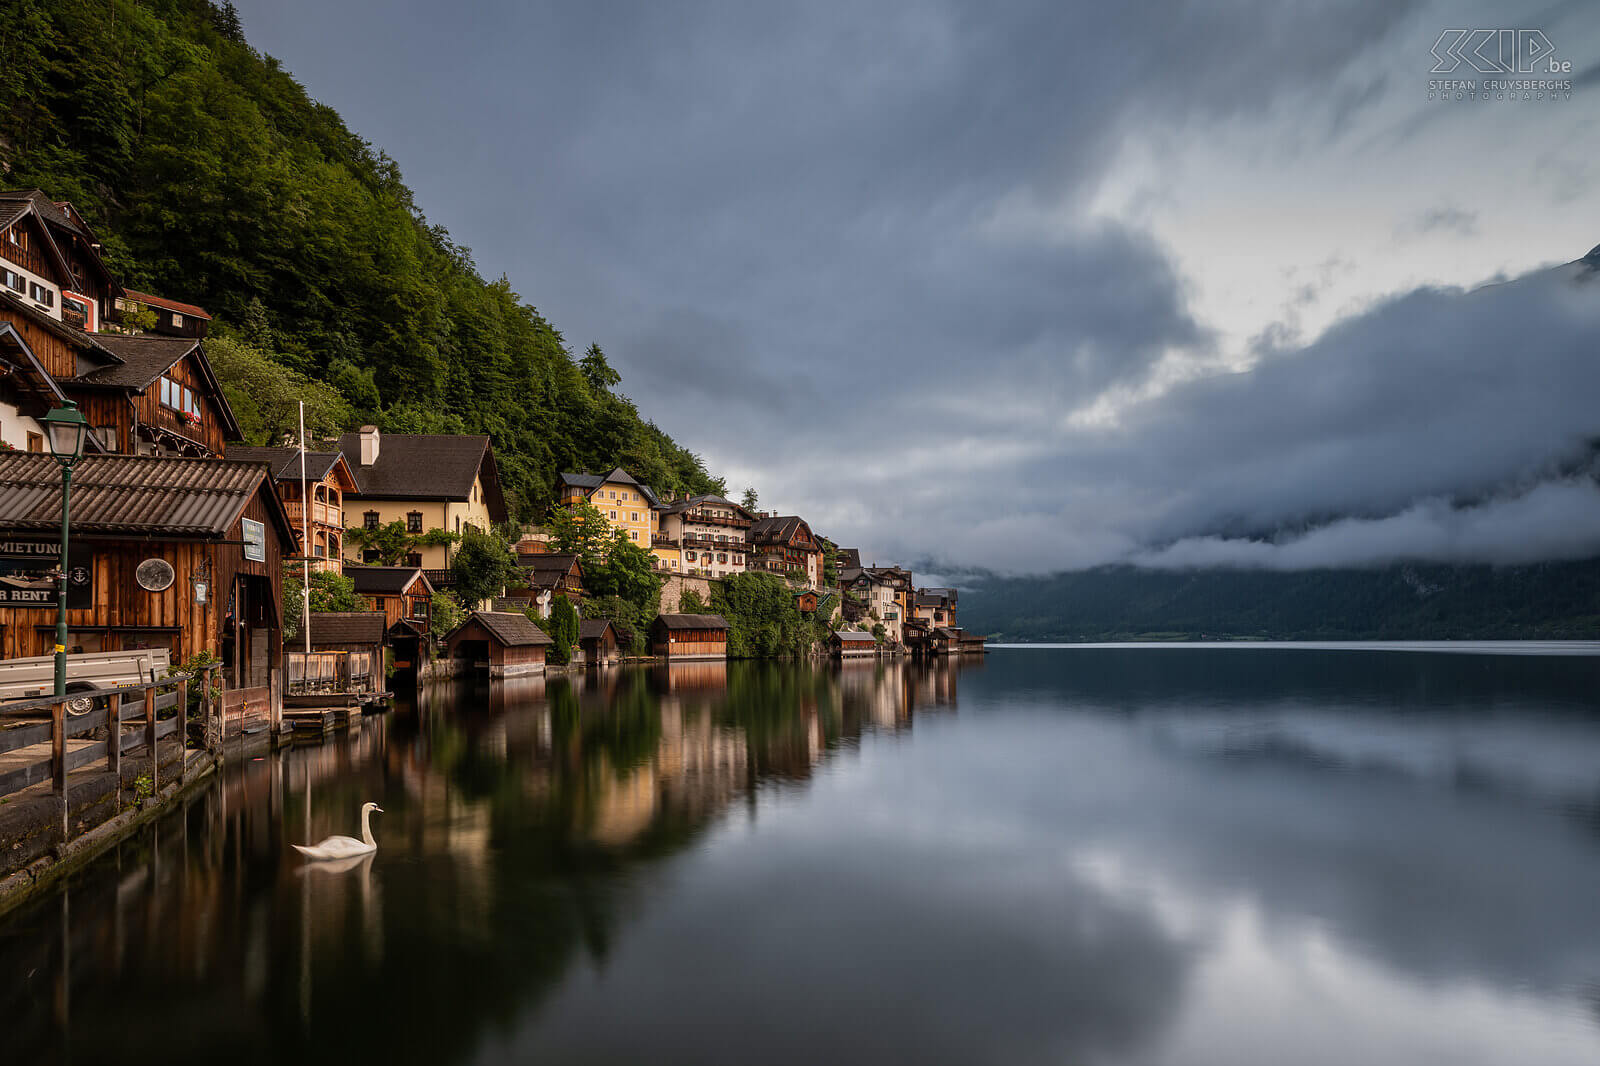 Hallstatt Hallstatt is one of the most beautiful villages in Austria and it is sandwiched between the Hallstättersee and the Dachstein Mountains Stefan Cruysberghs